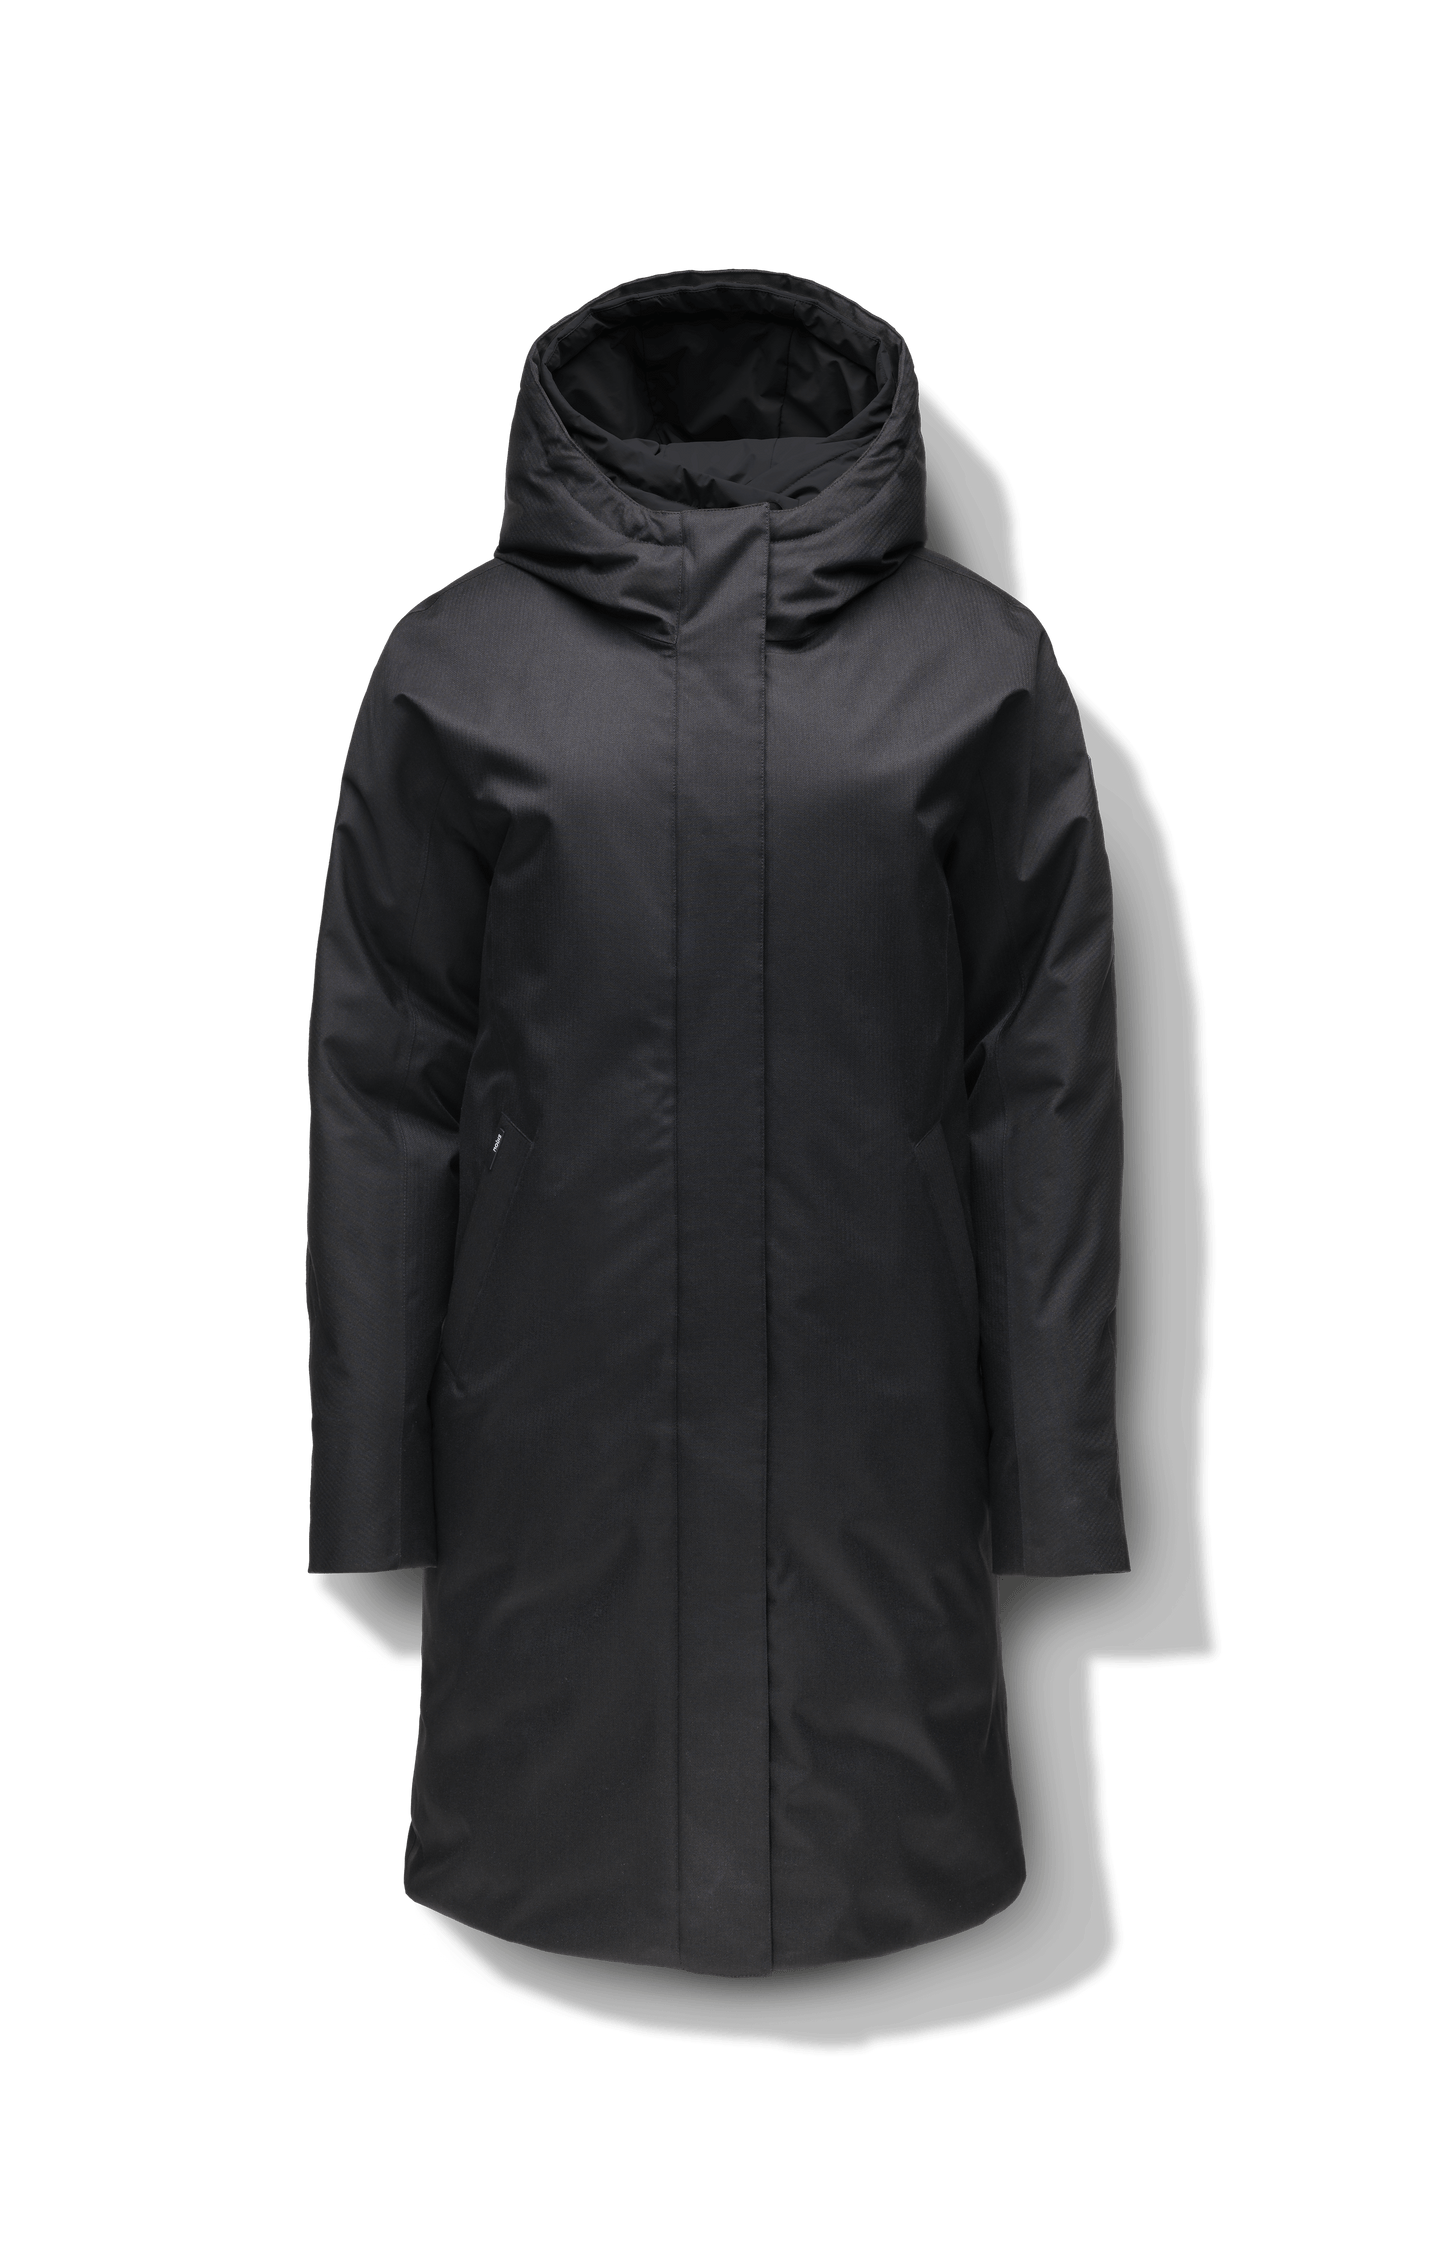 Dory Women's Tailored Back Zip Parka in knee length, premium Crosshatch fabrication, Premium Canadian White Duck Down insulation, non-removable down-filled hood, removable interior hood, centre front two-way zipper with wind flap, vertical zipper detailing along back, in Black